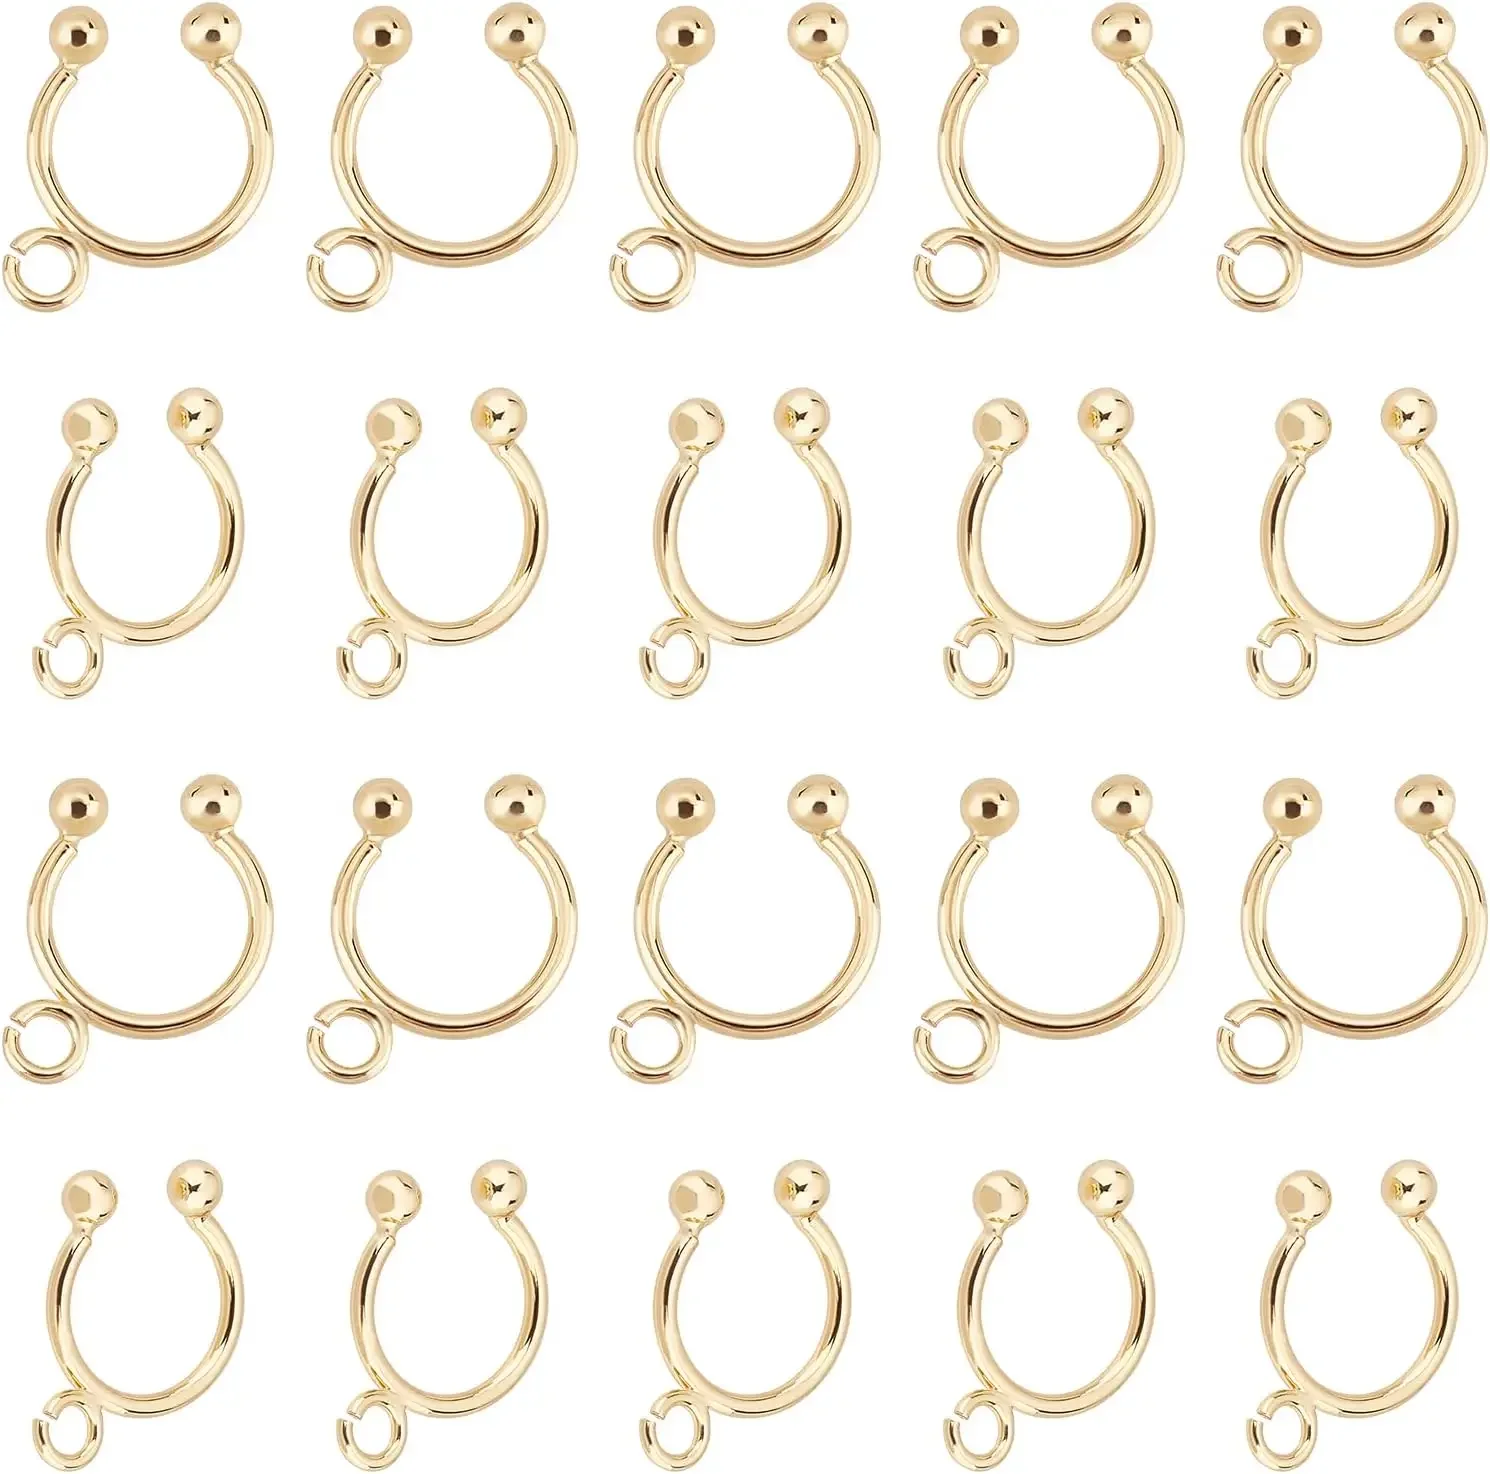 

20Pcs DIY Ear Cuff Cartilage Cuff Earrings for Women Brass Real 18K Gold Plated Simple Fake Piercing Earrings with Hoops